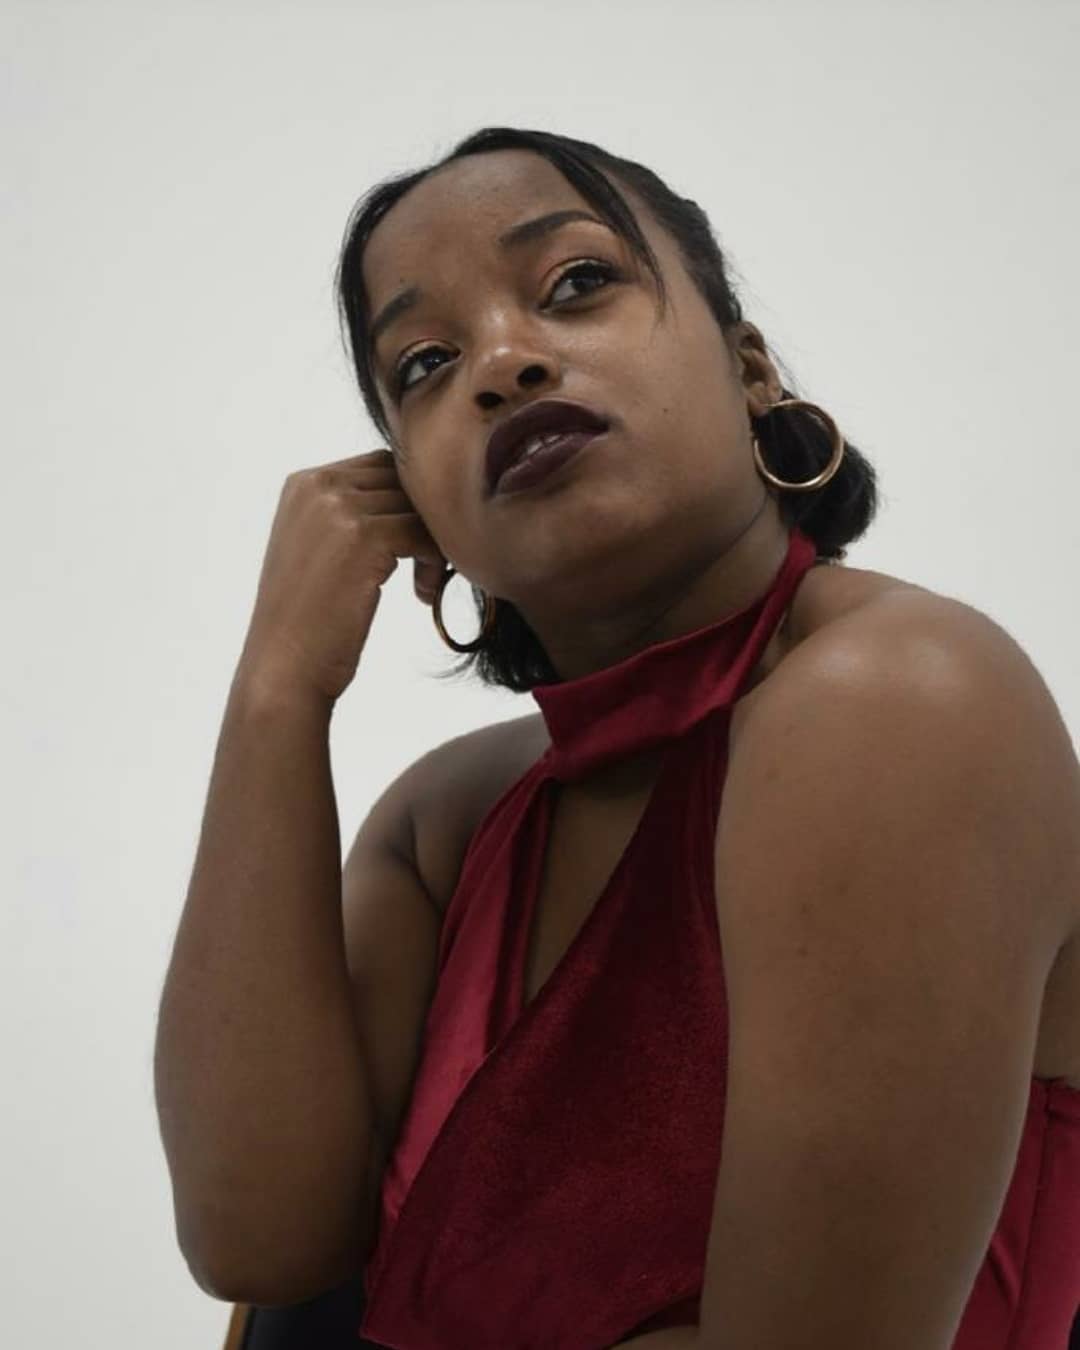 Clad in a red velvet dress, Maiya Redding presses a fist to her cheek